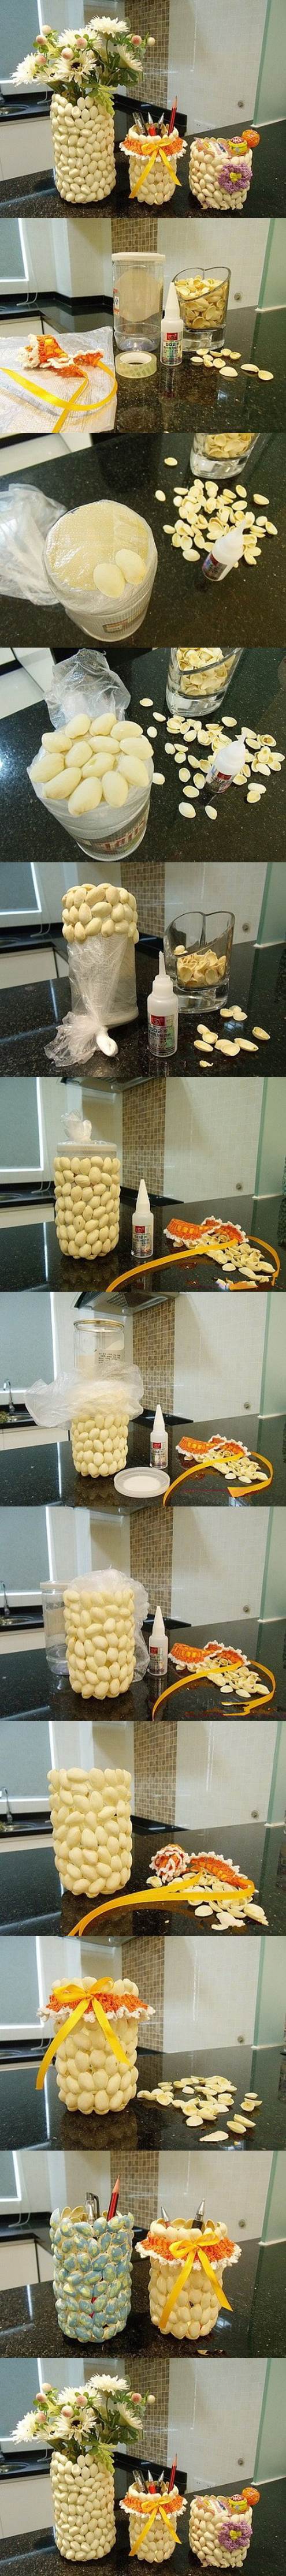 DIY Pencil Holder and Vase with Pistachio Shells 2